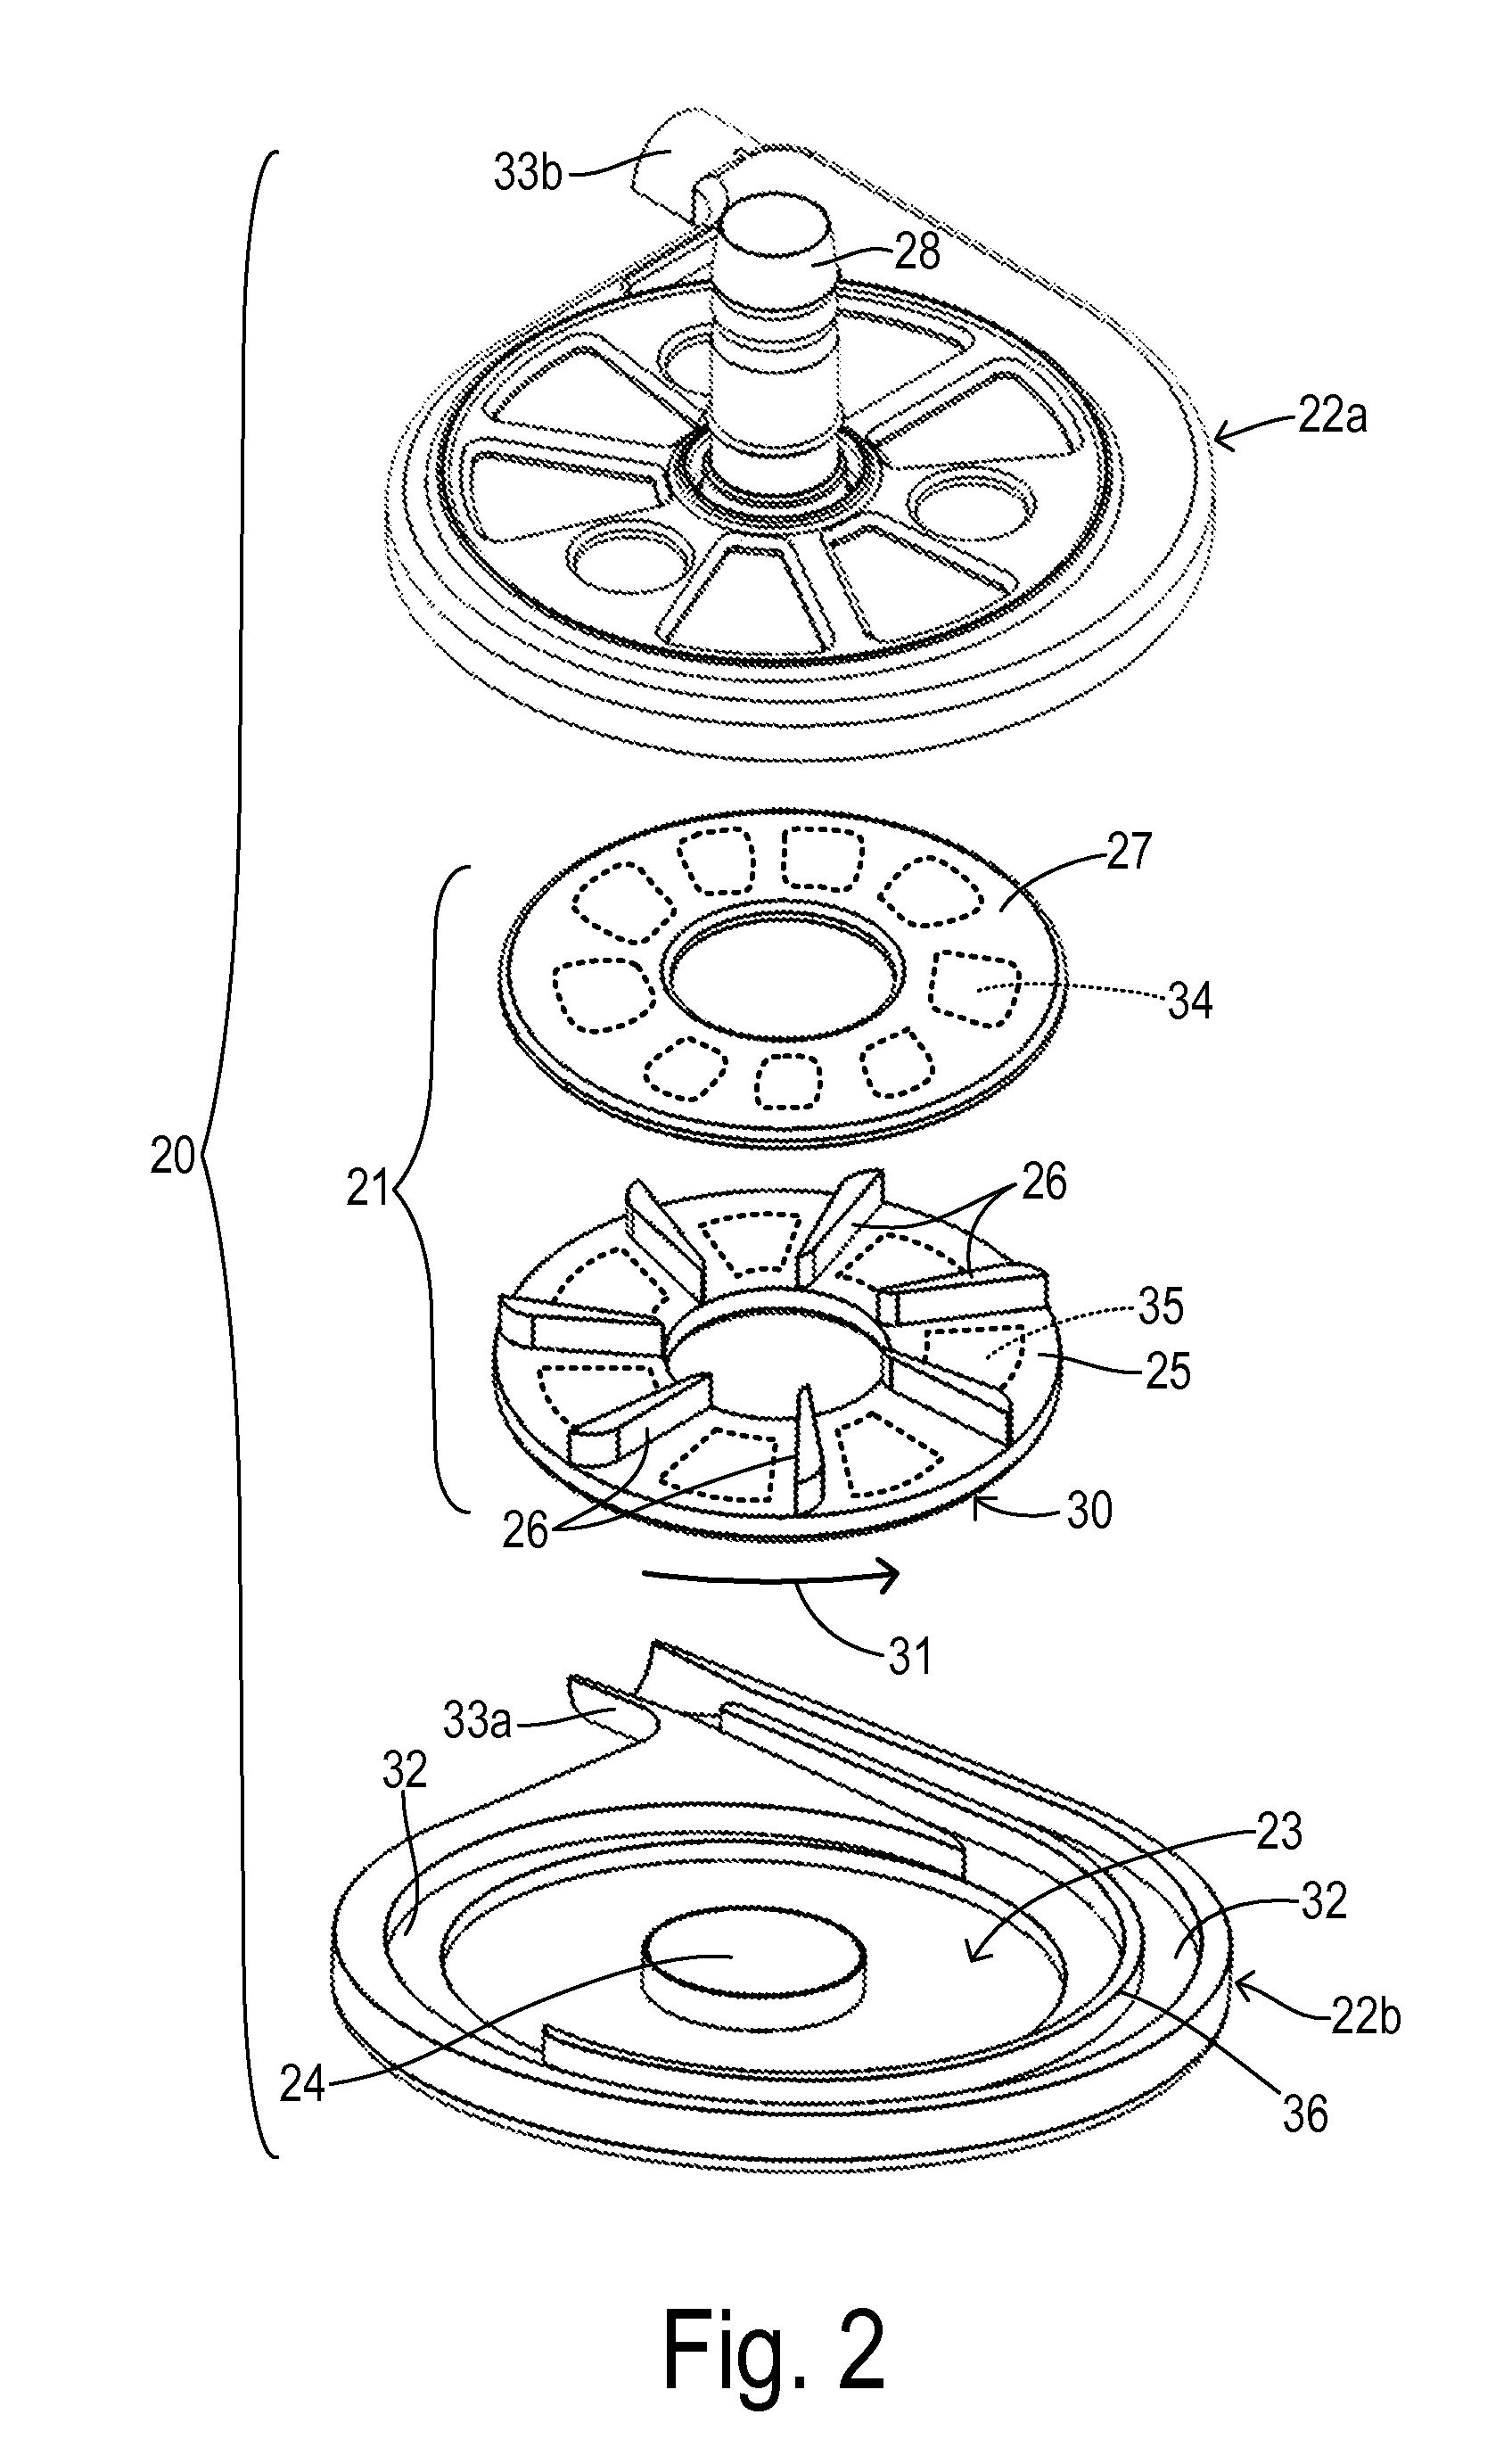 Rotary pump with levitated impeller having thrust bearing for improved startup